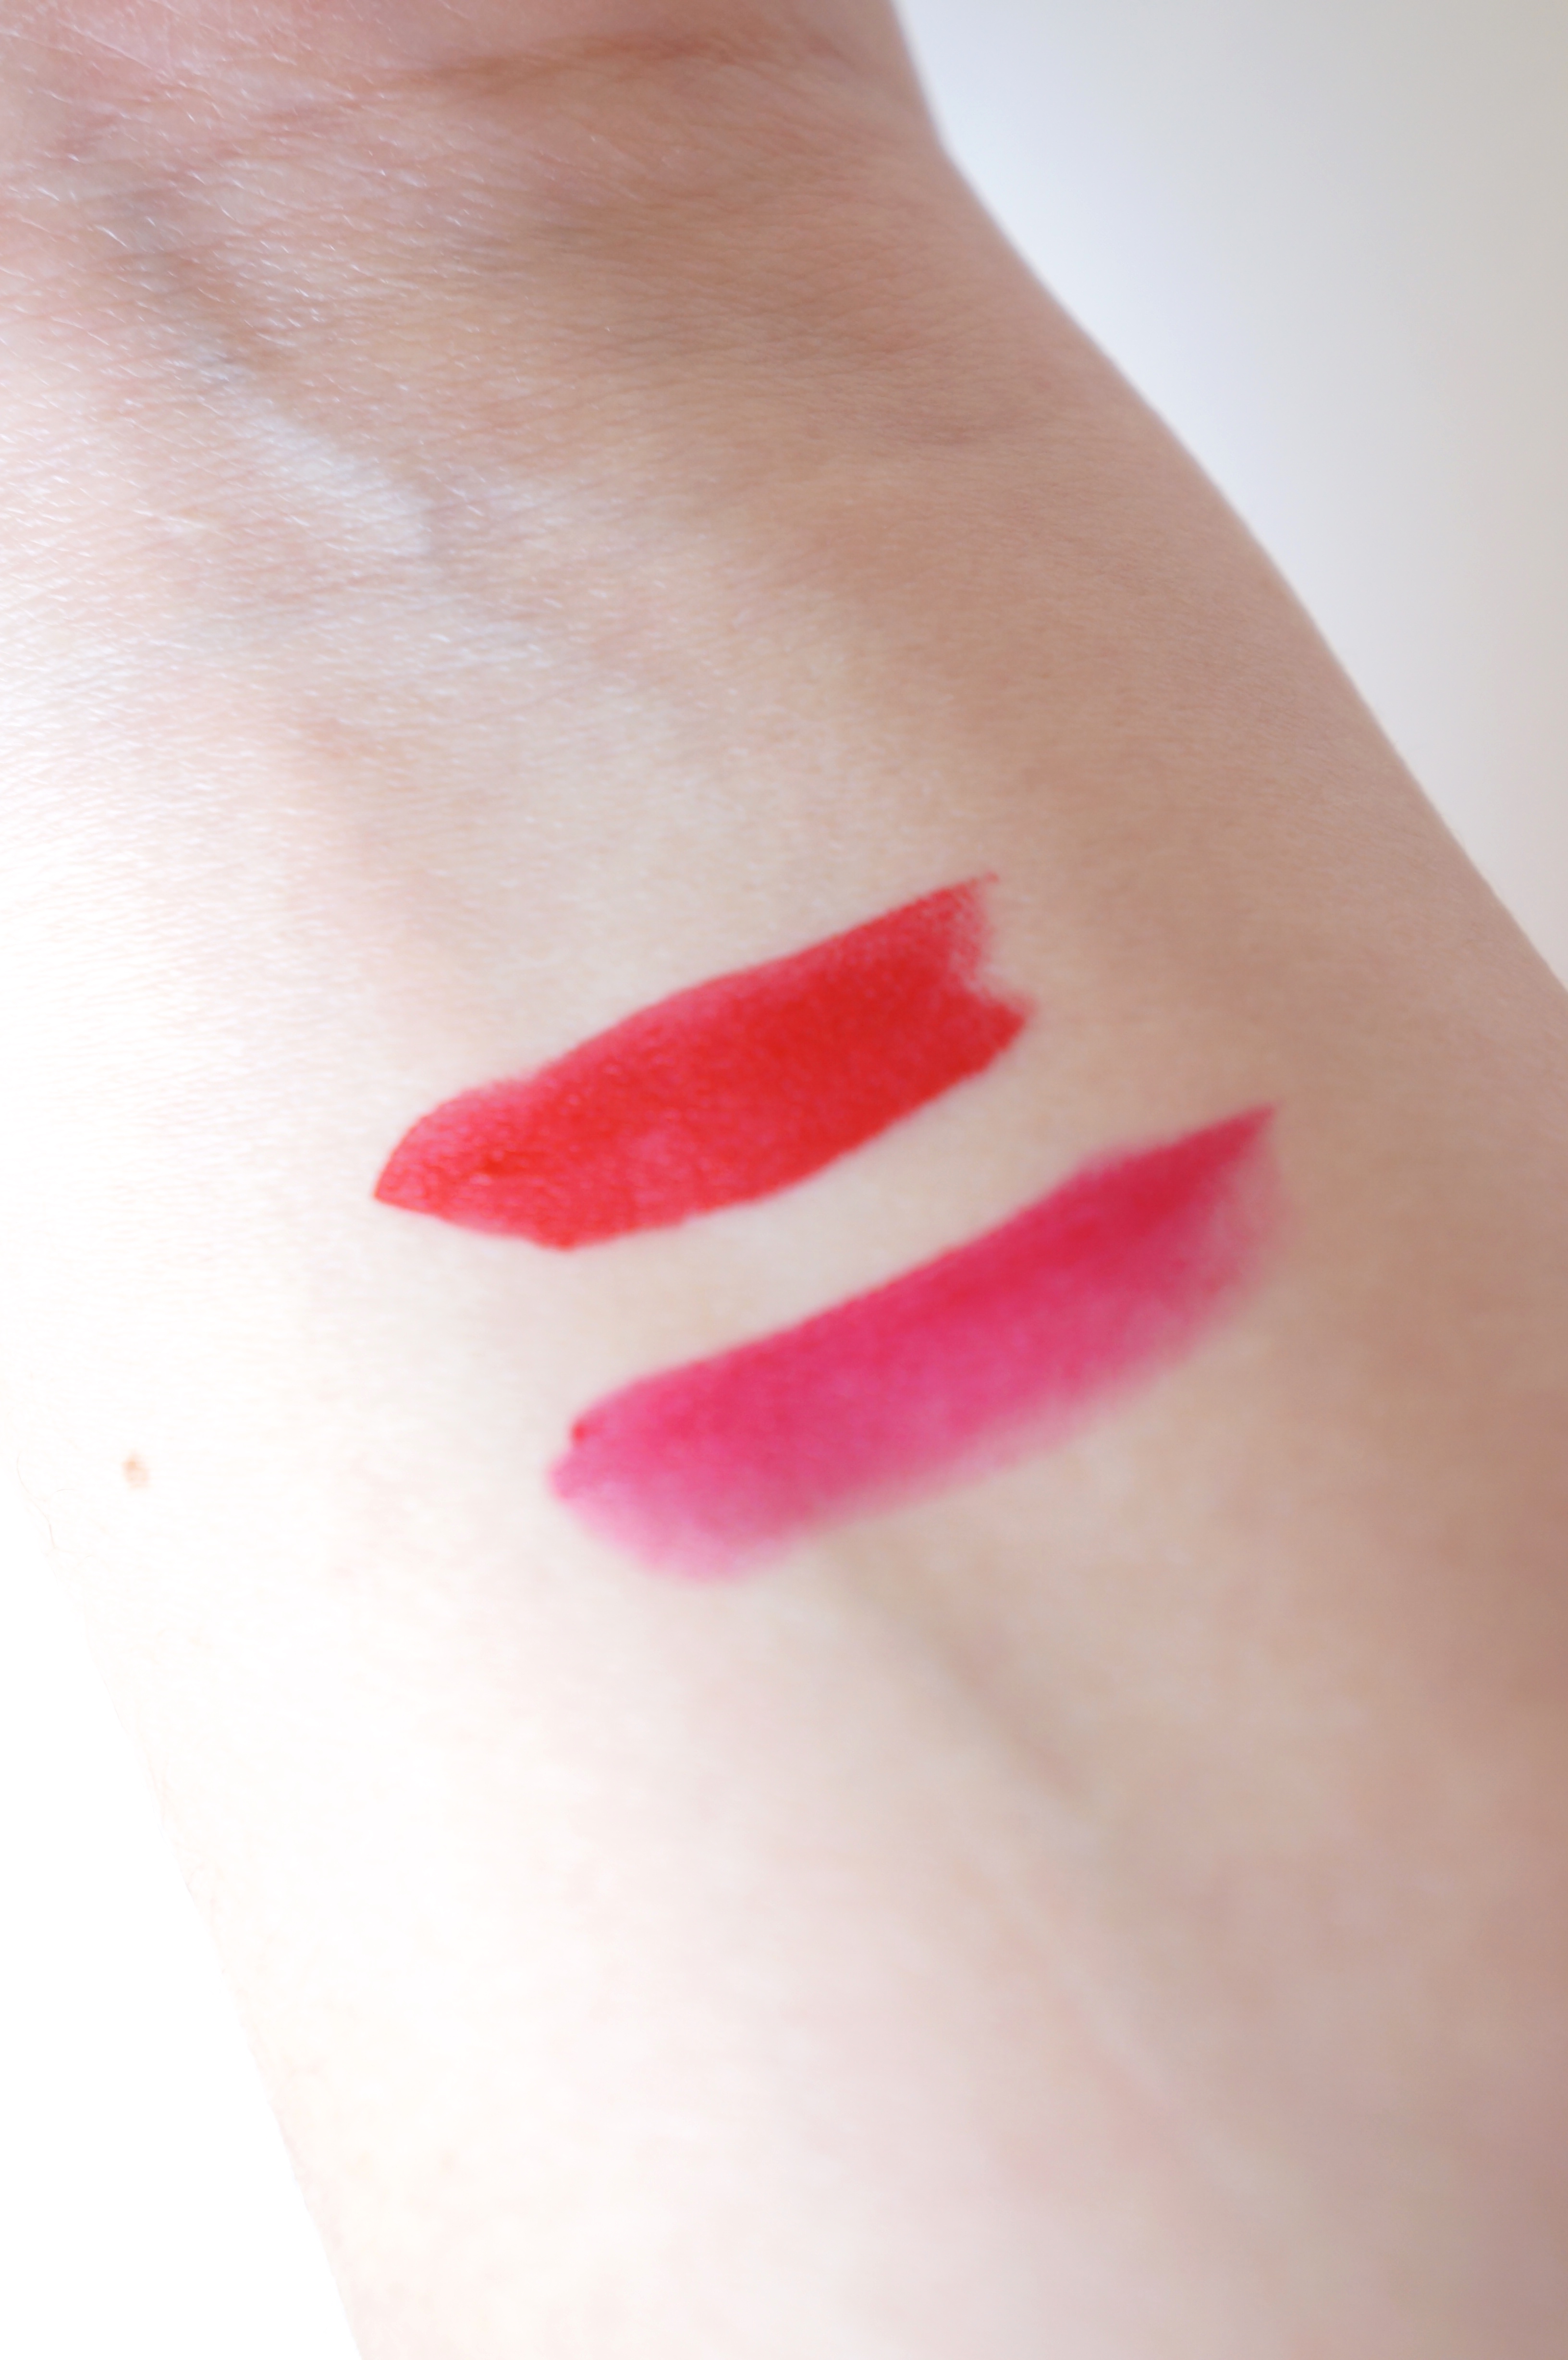 Sisley Phyto Lip Twist with Tango (up) and Kiss (down) / Pic by 1FDLE.